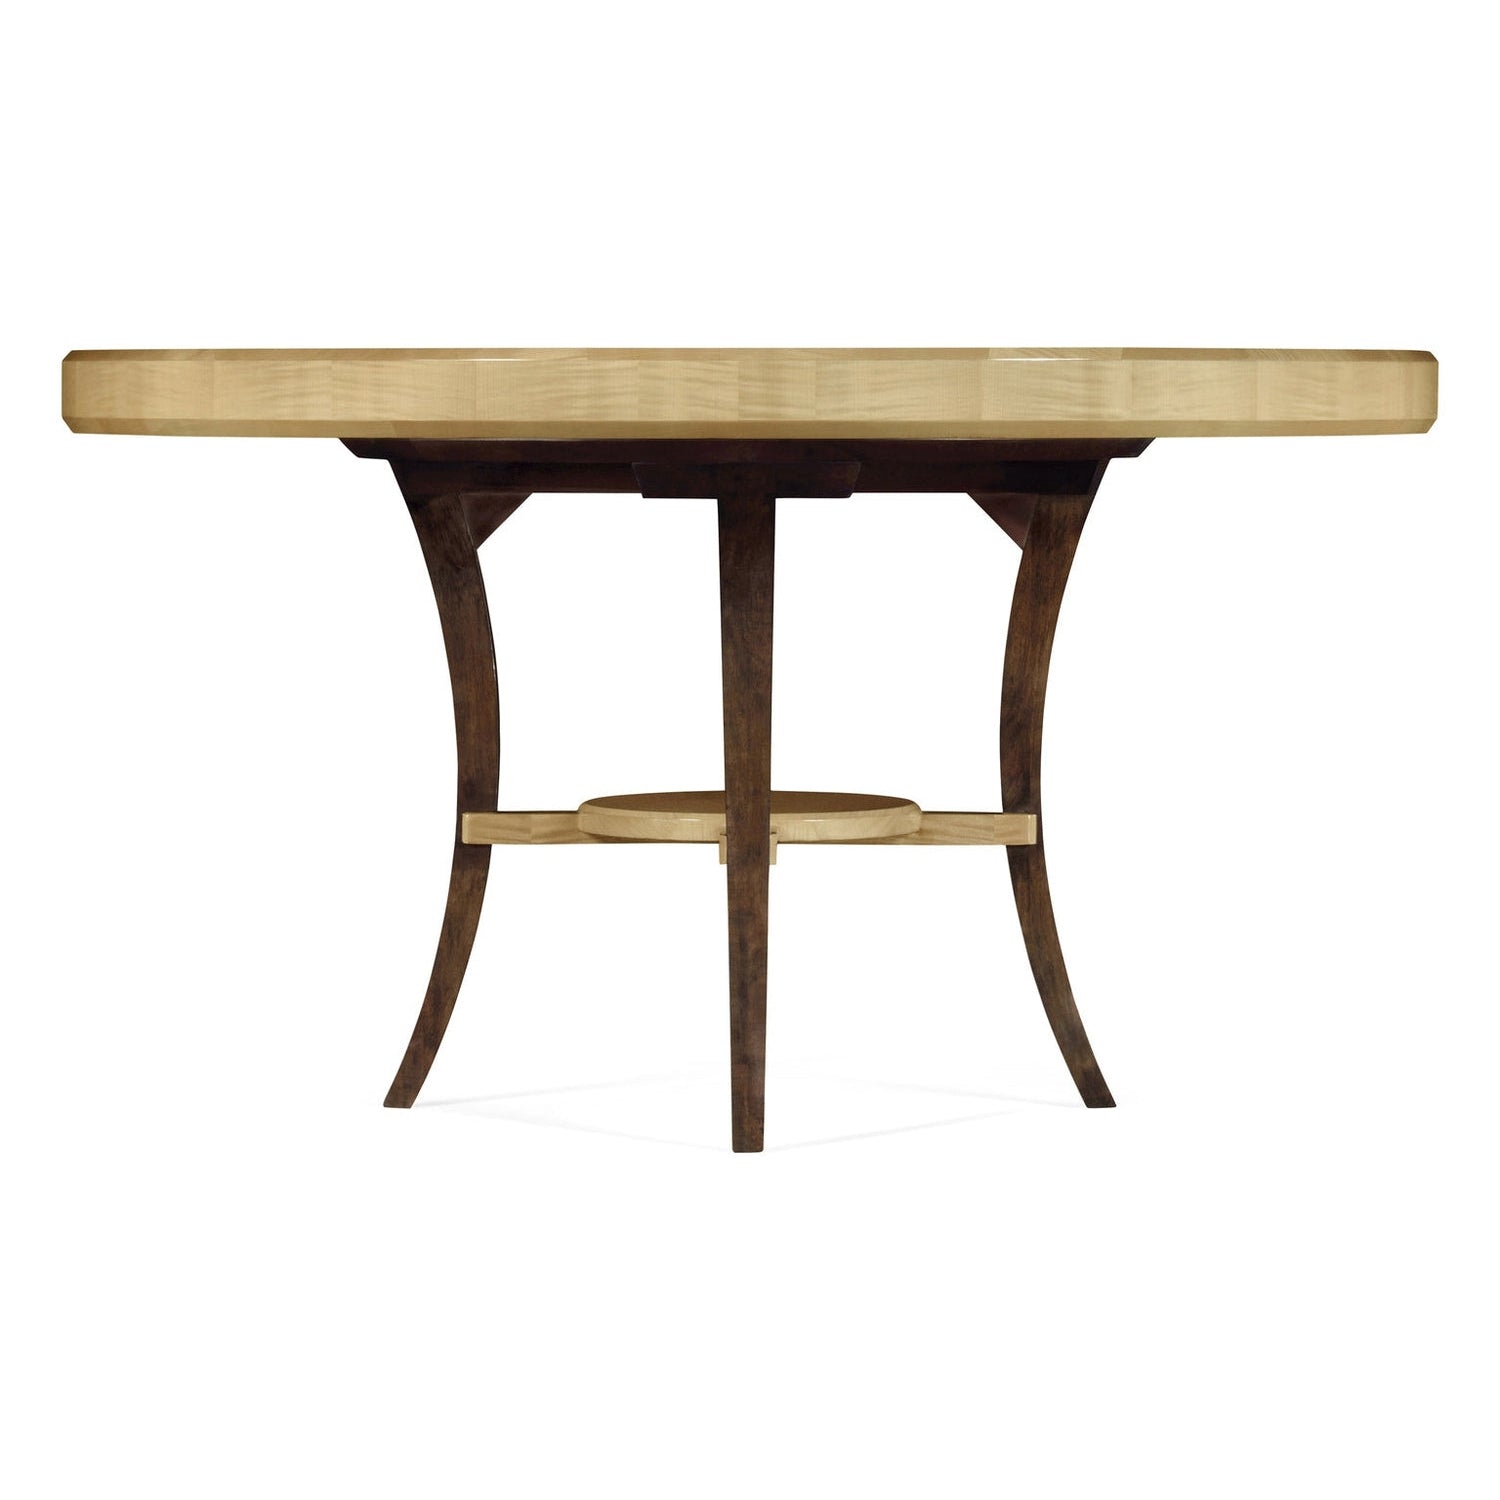 Jonathan Charles, 54" Art Deco Round Dining Table